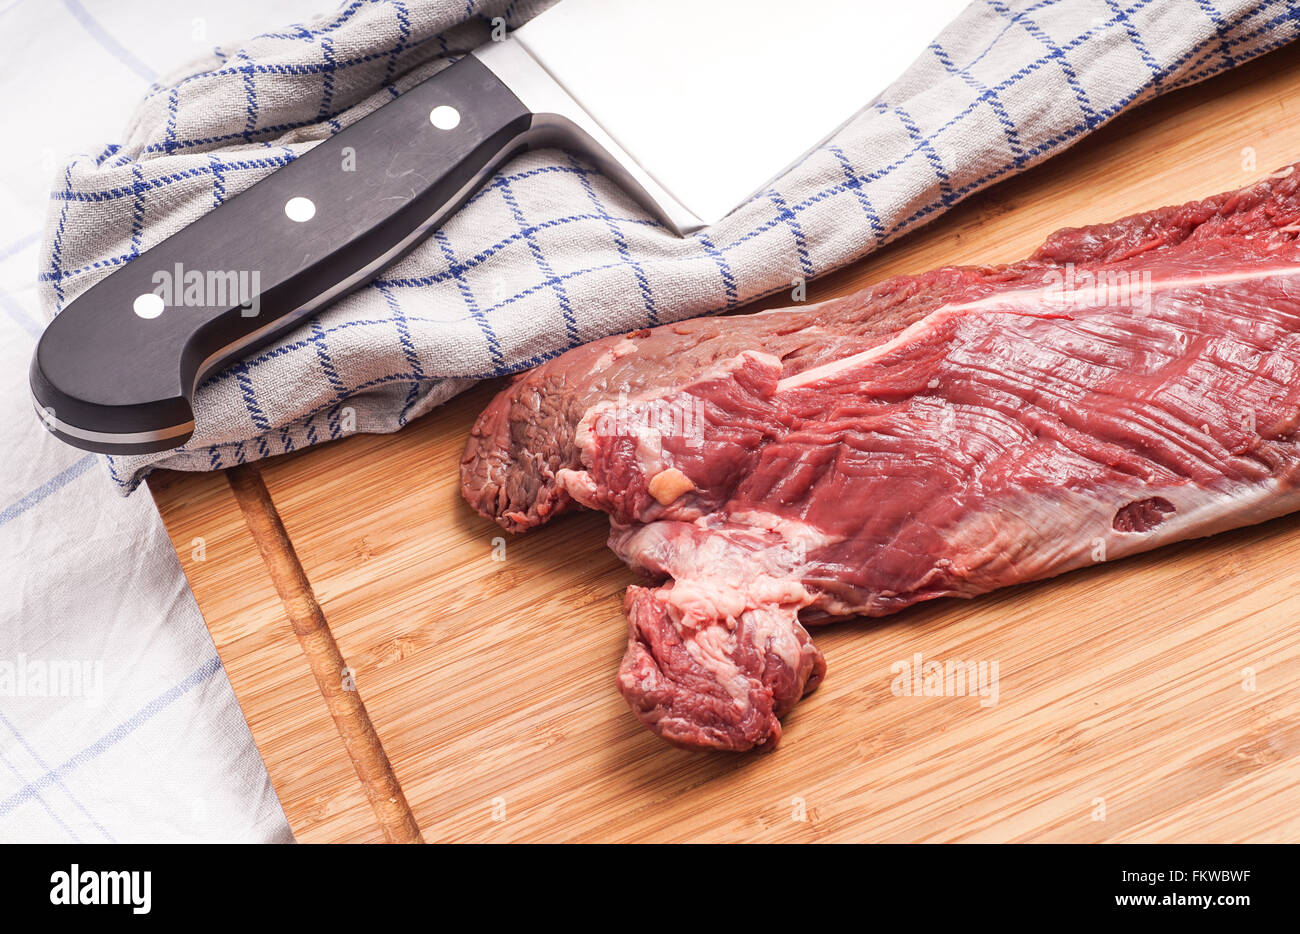 Hanging tender, Hanger steak, onglet - before the meat has been trimmed by the butcher Stock Photo